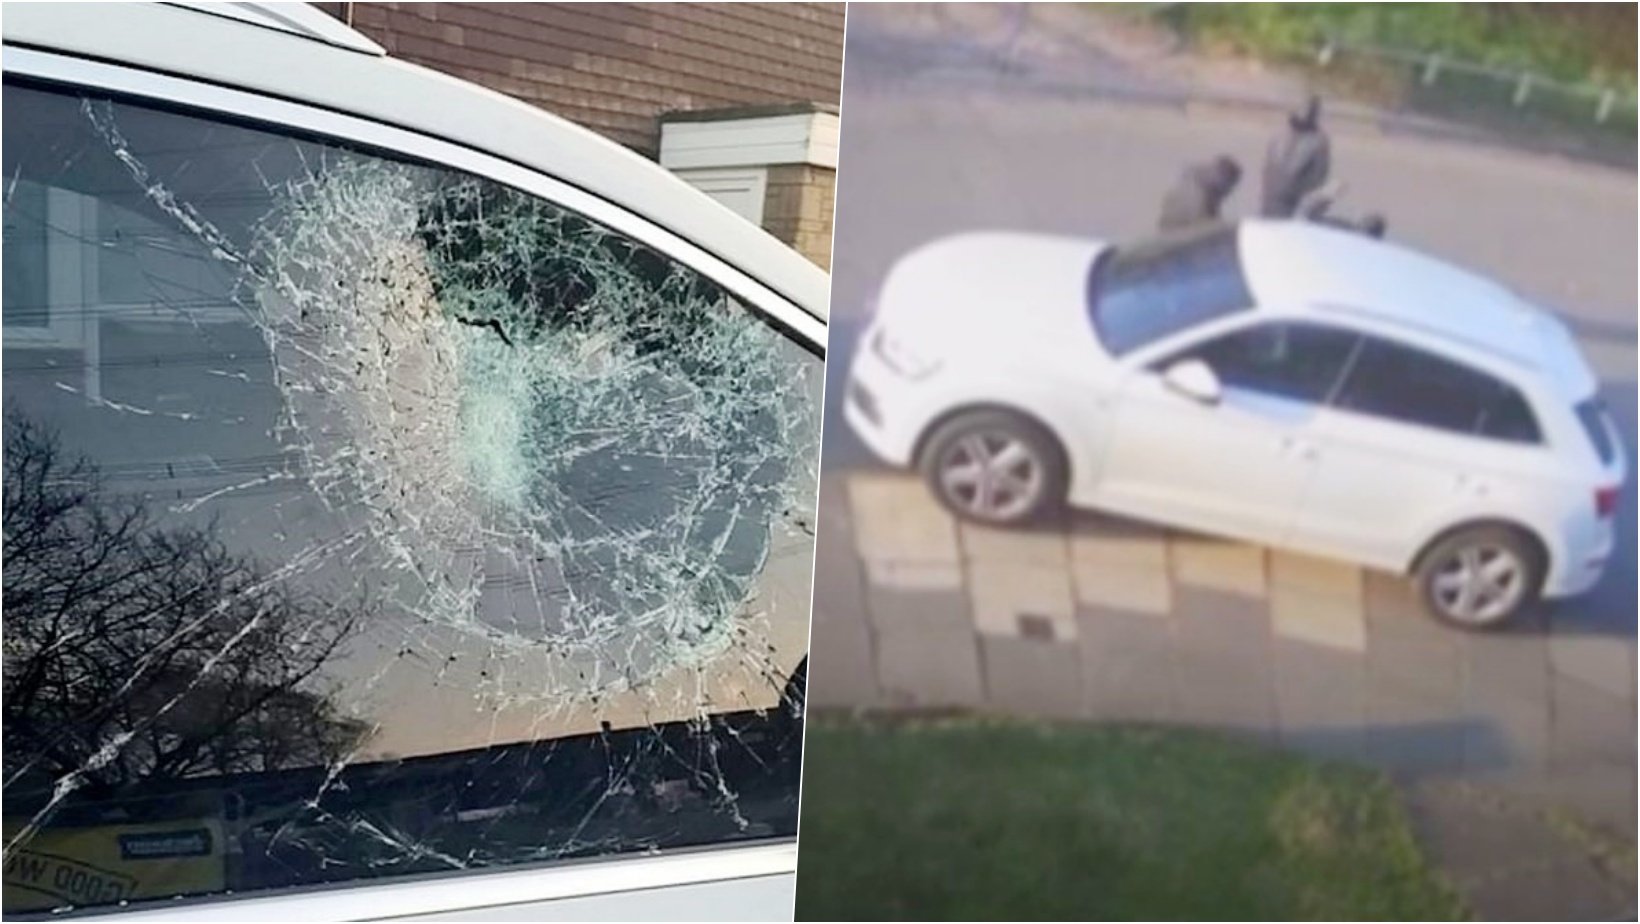 6 facebook cover 5.jpg?resize=412,275 - 7-Year-Old Boy Screams “Drive Mom, Drive” After Carjack Masked Thugs With Machete Smashed Car’s Window